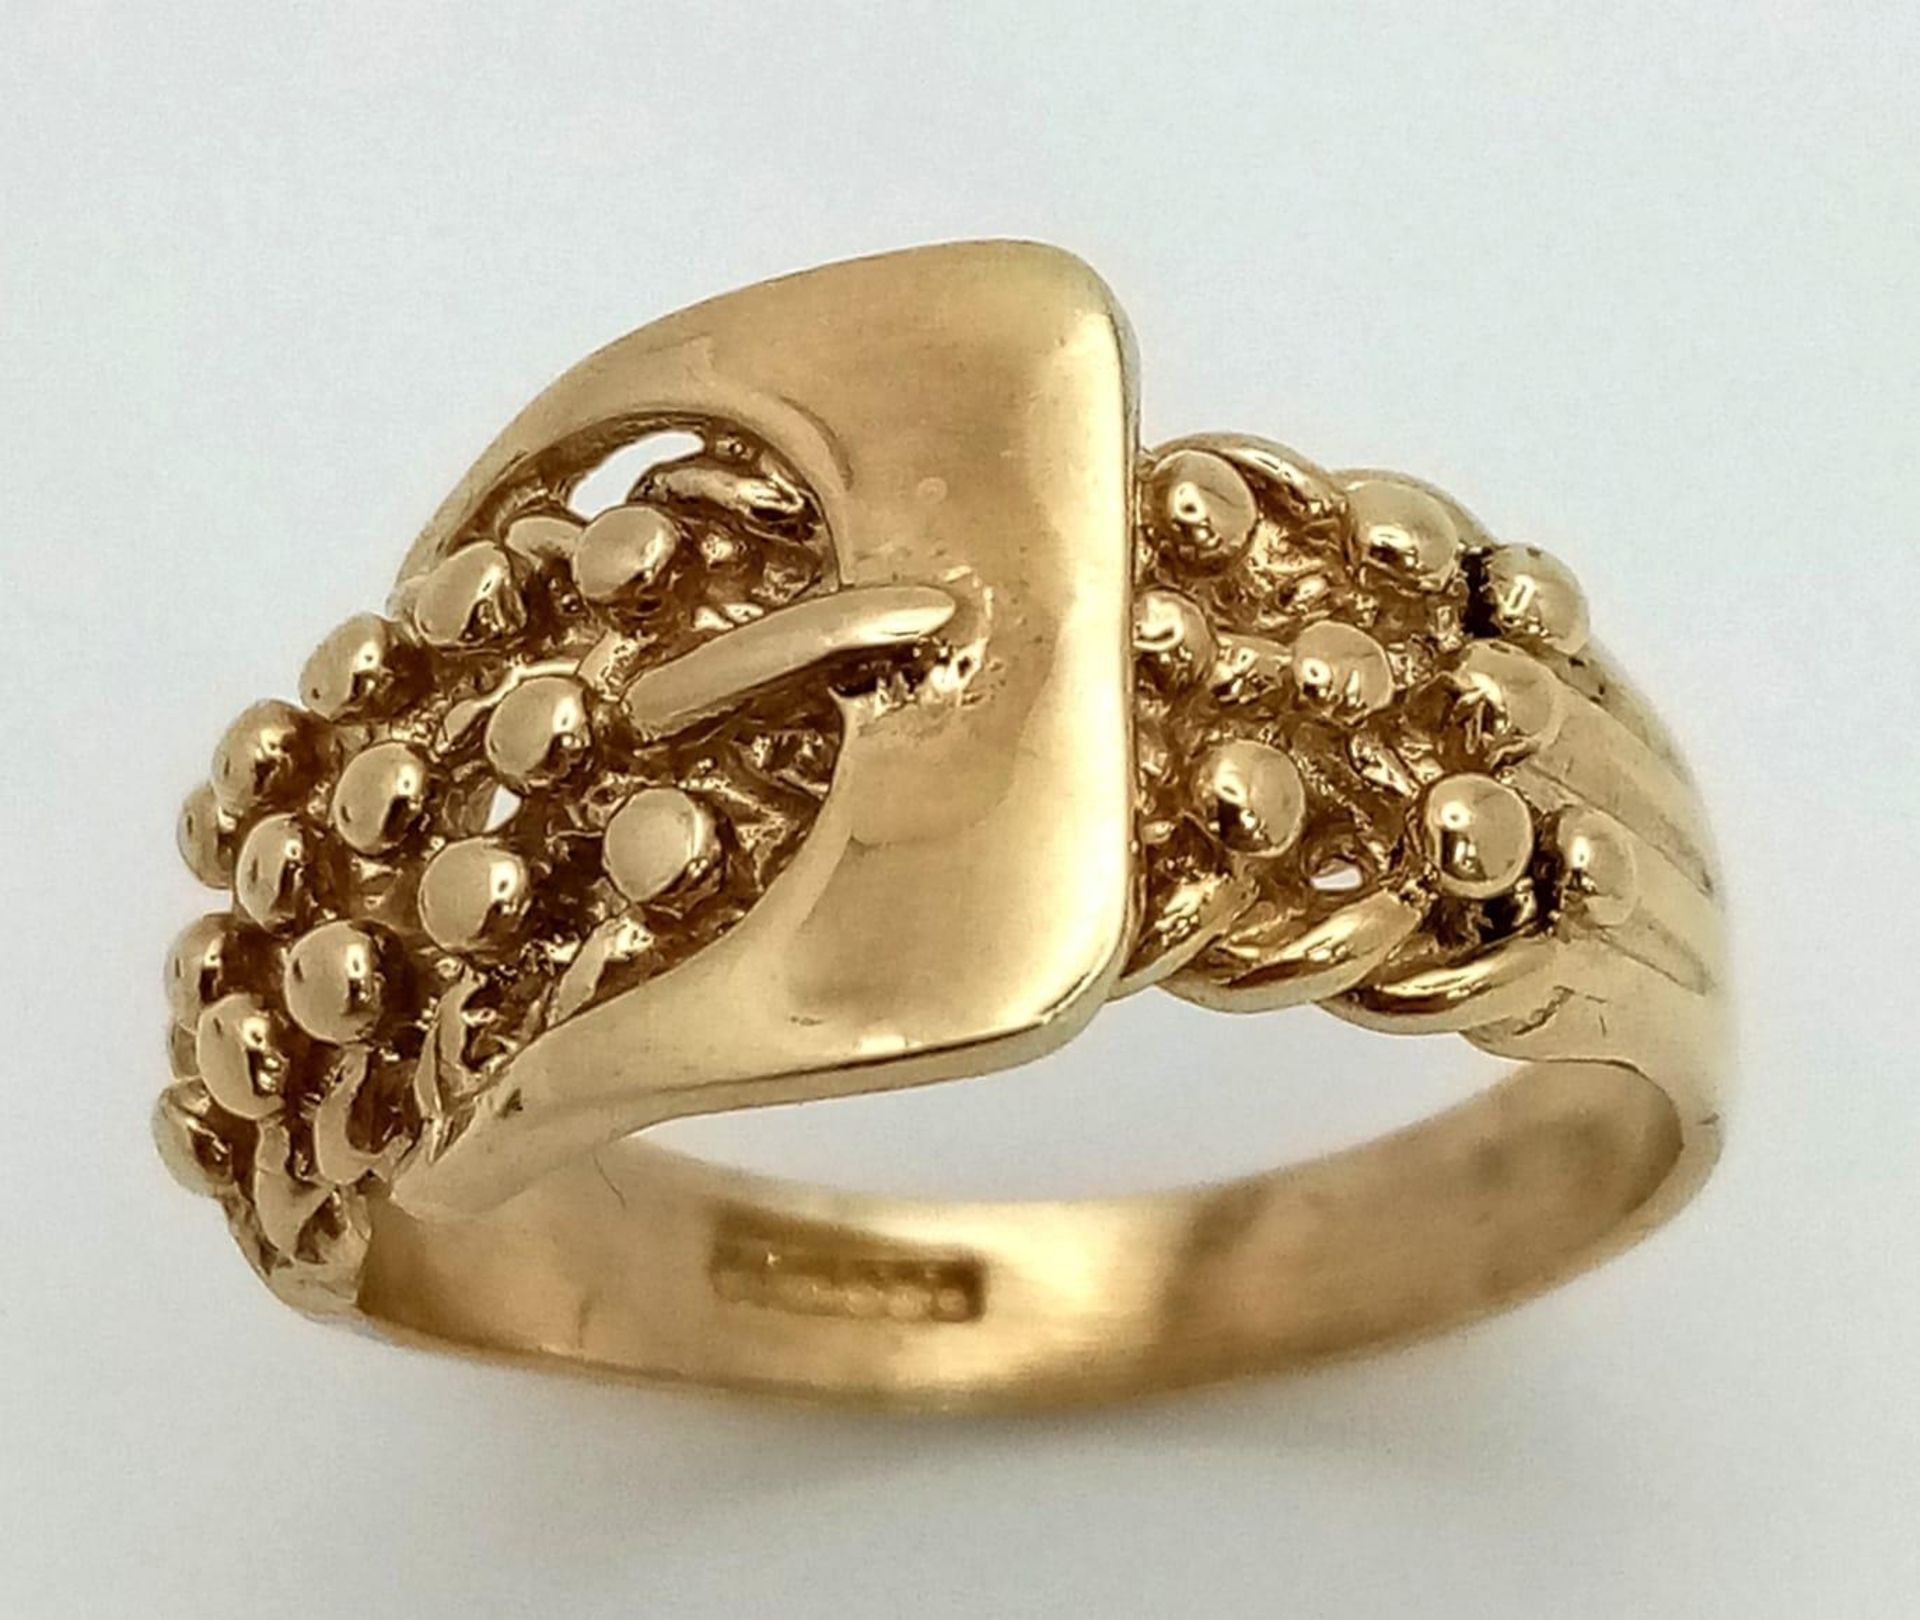 A 9K YELLOW GOLD BUCKLE KEEPER RING 7.6G SIZE U